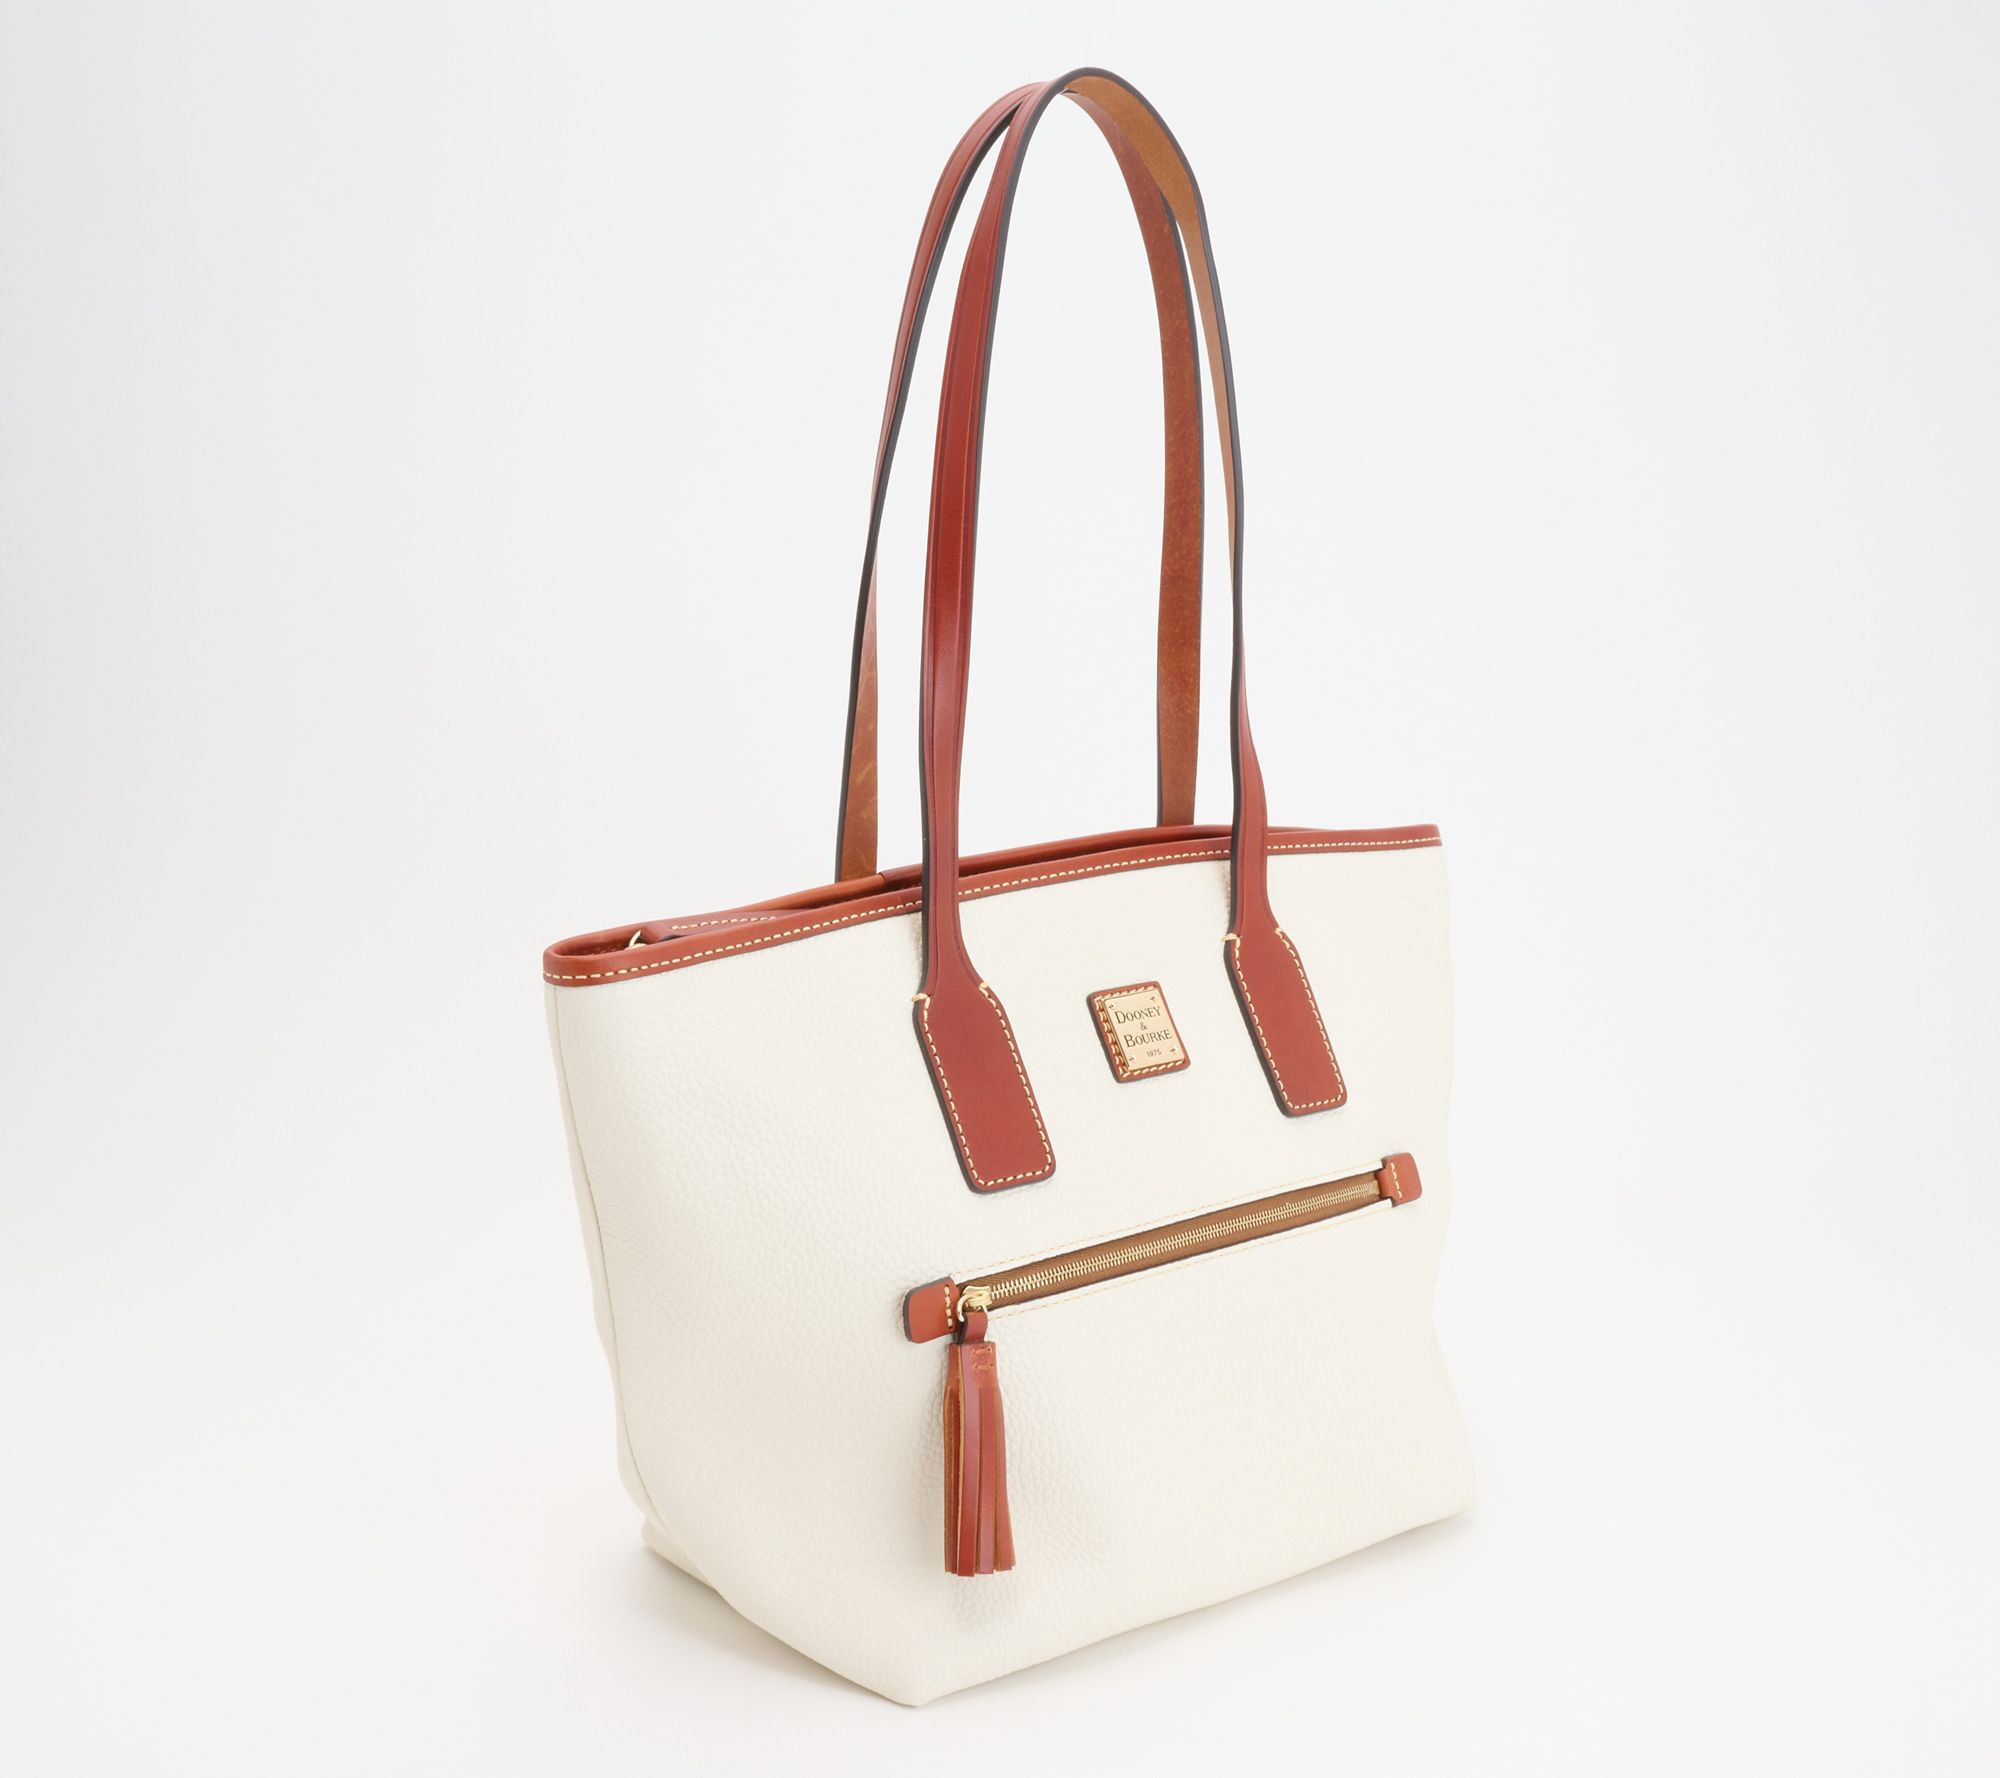 Dooney & Bourke Emerson Leather Small Tote Handbag- Shannon on QVC